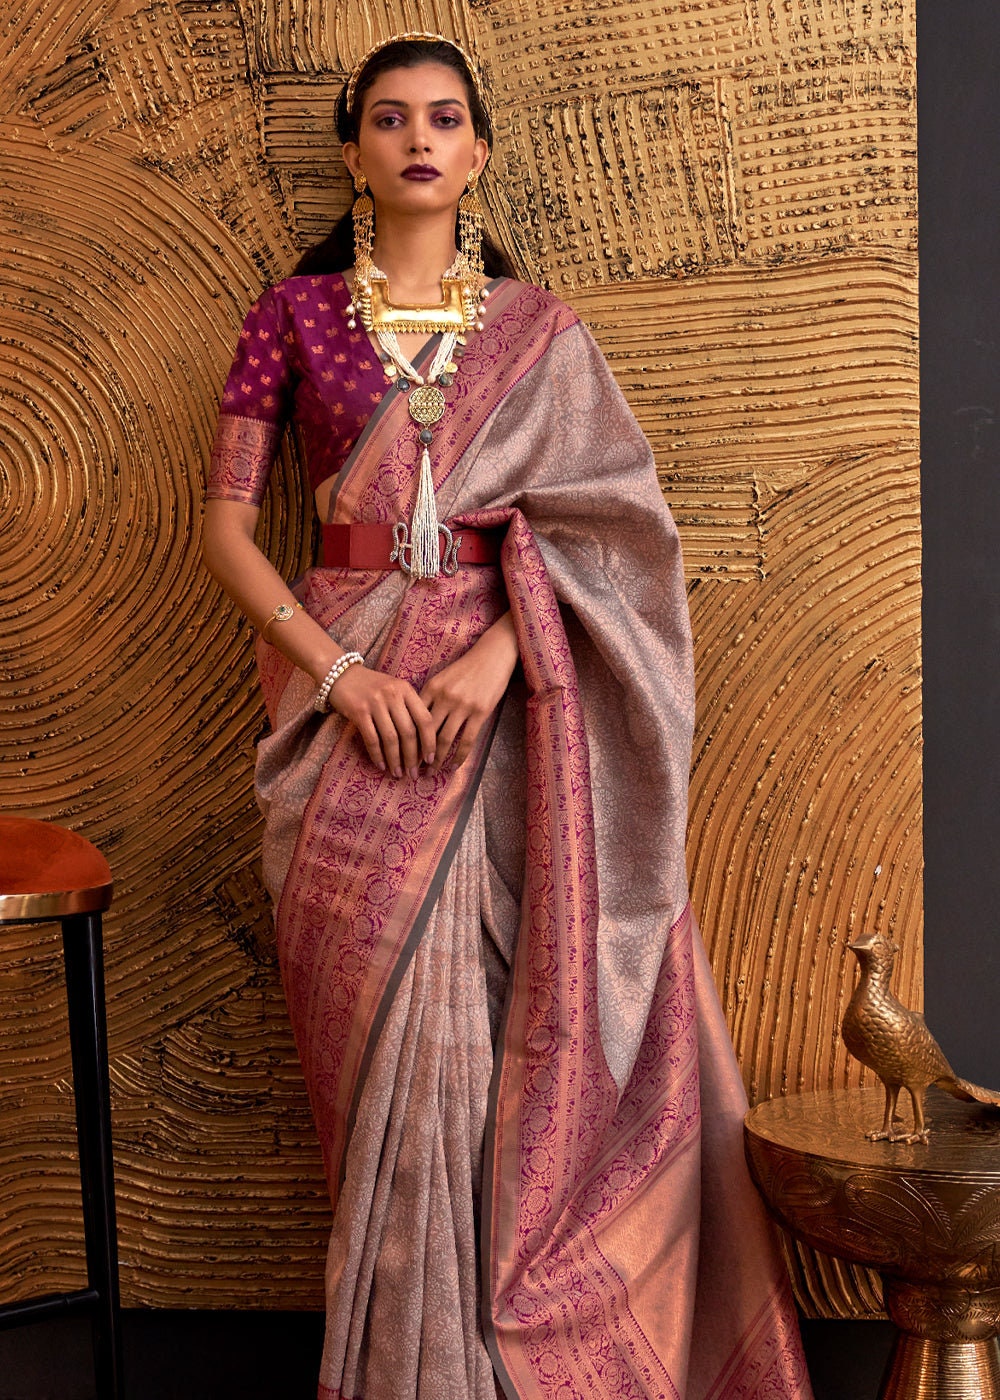 Chaap Handloom Weaving Silk Saree and Blouse for Women Party